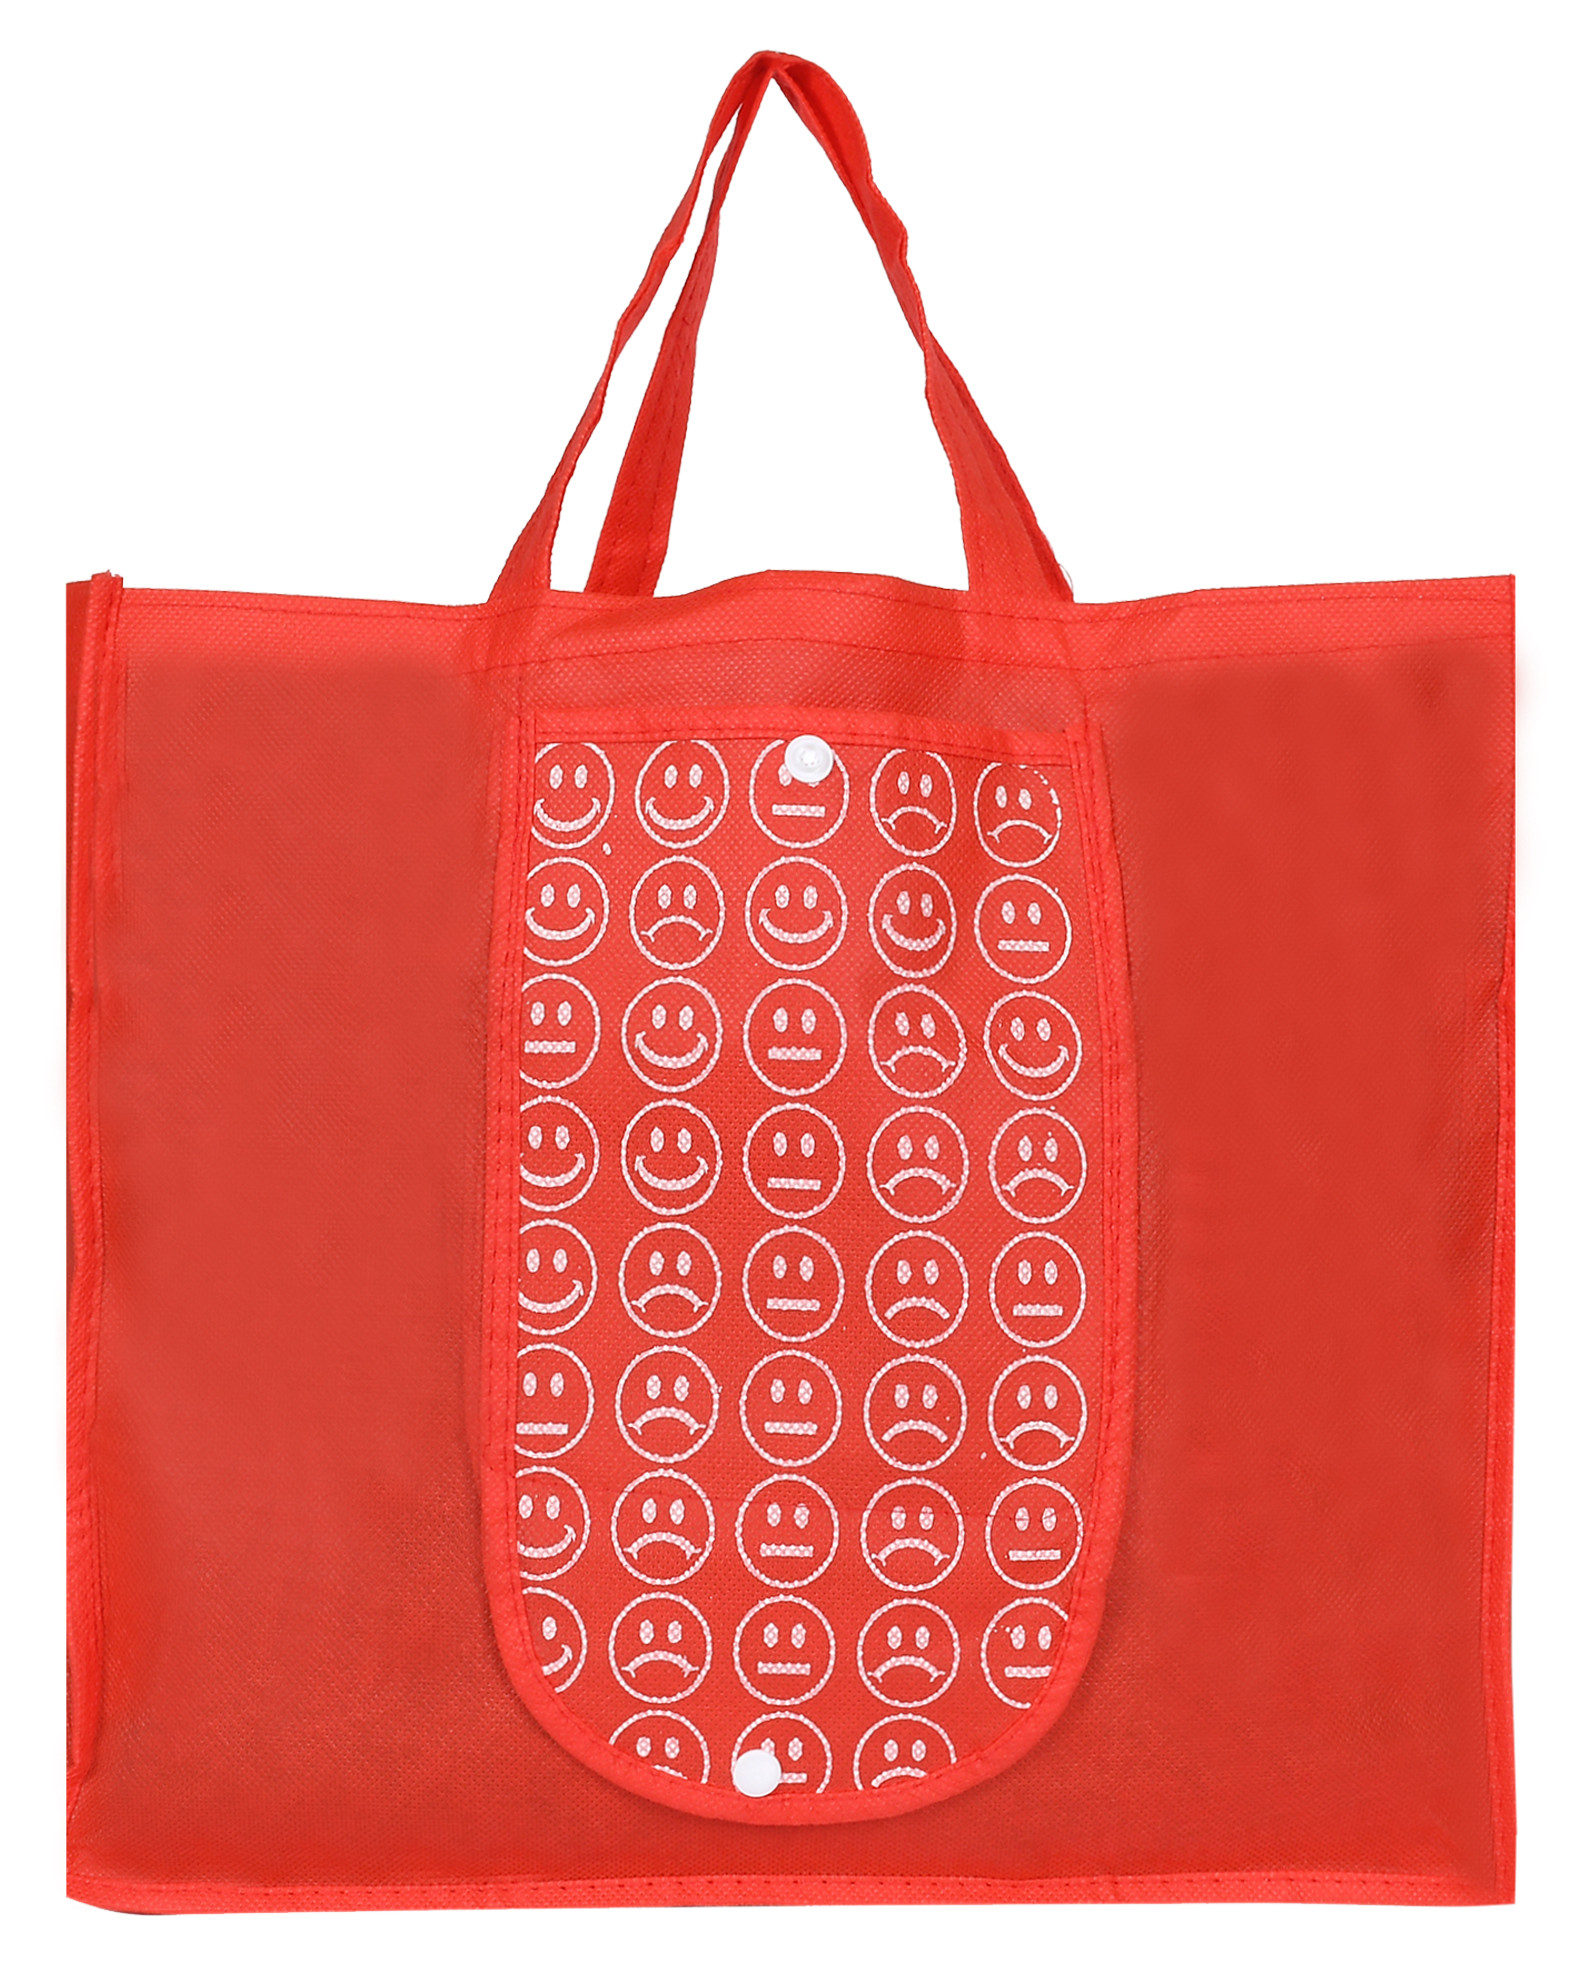 Kuber Industries Shopping Grocery Bags Foldable, Washable Grocery Tote Bag with One Small Pocket, Eco-Friendly Purse Bag Fits in Pocket Waterproof & Lightweight (Red)